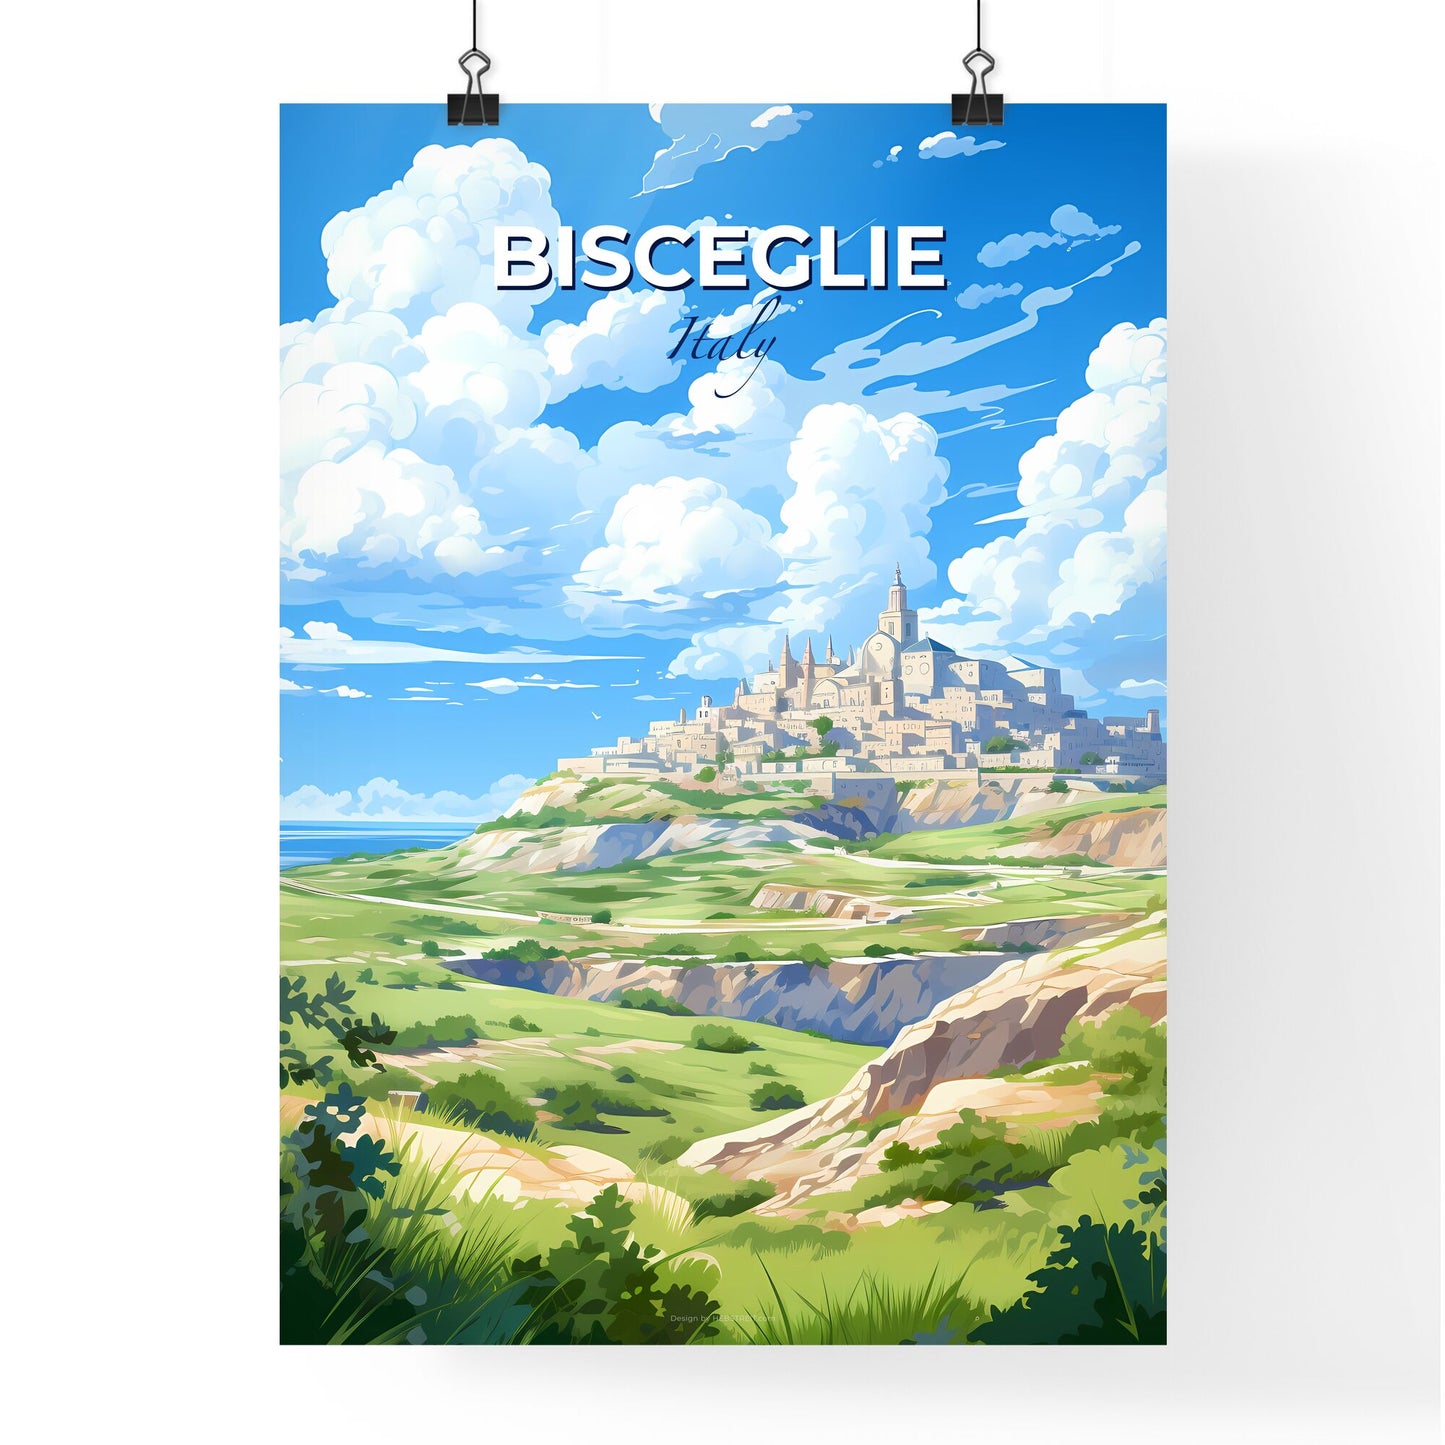 Bisceglie, Italy, A Poster of a landscape of a town on a hill Default Title